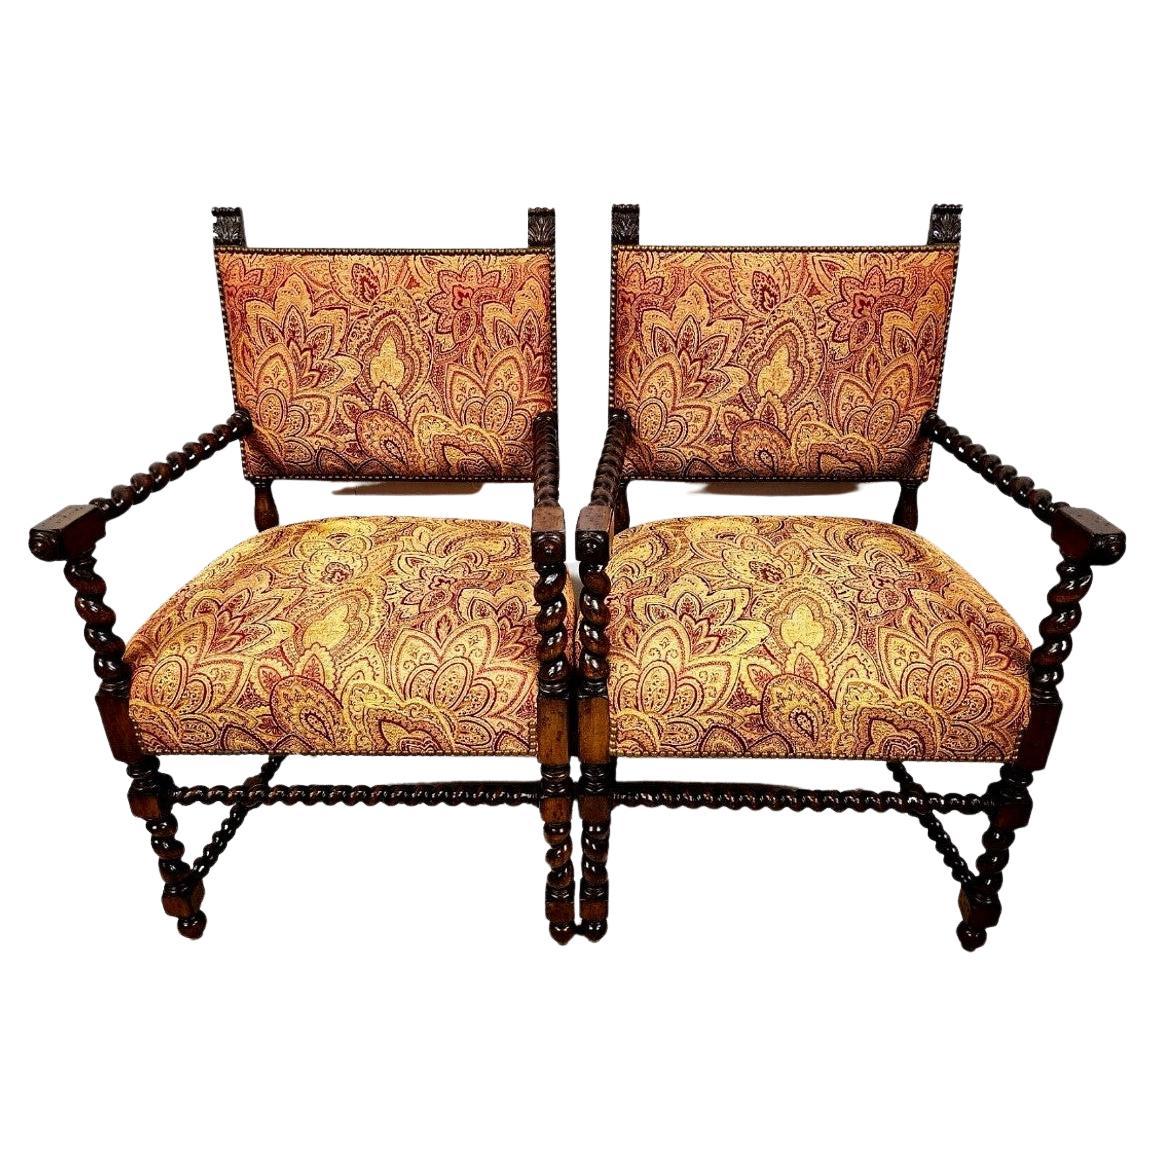 Spanish Revival Armchairs Antique Set of 2 For Sale